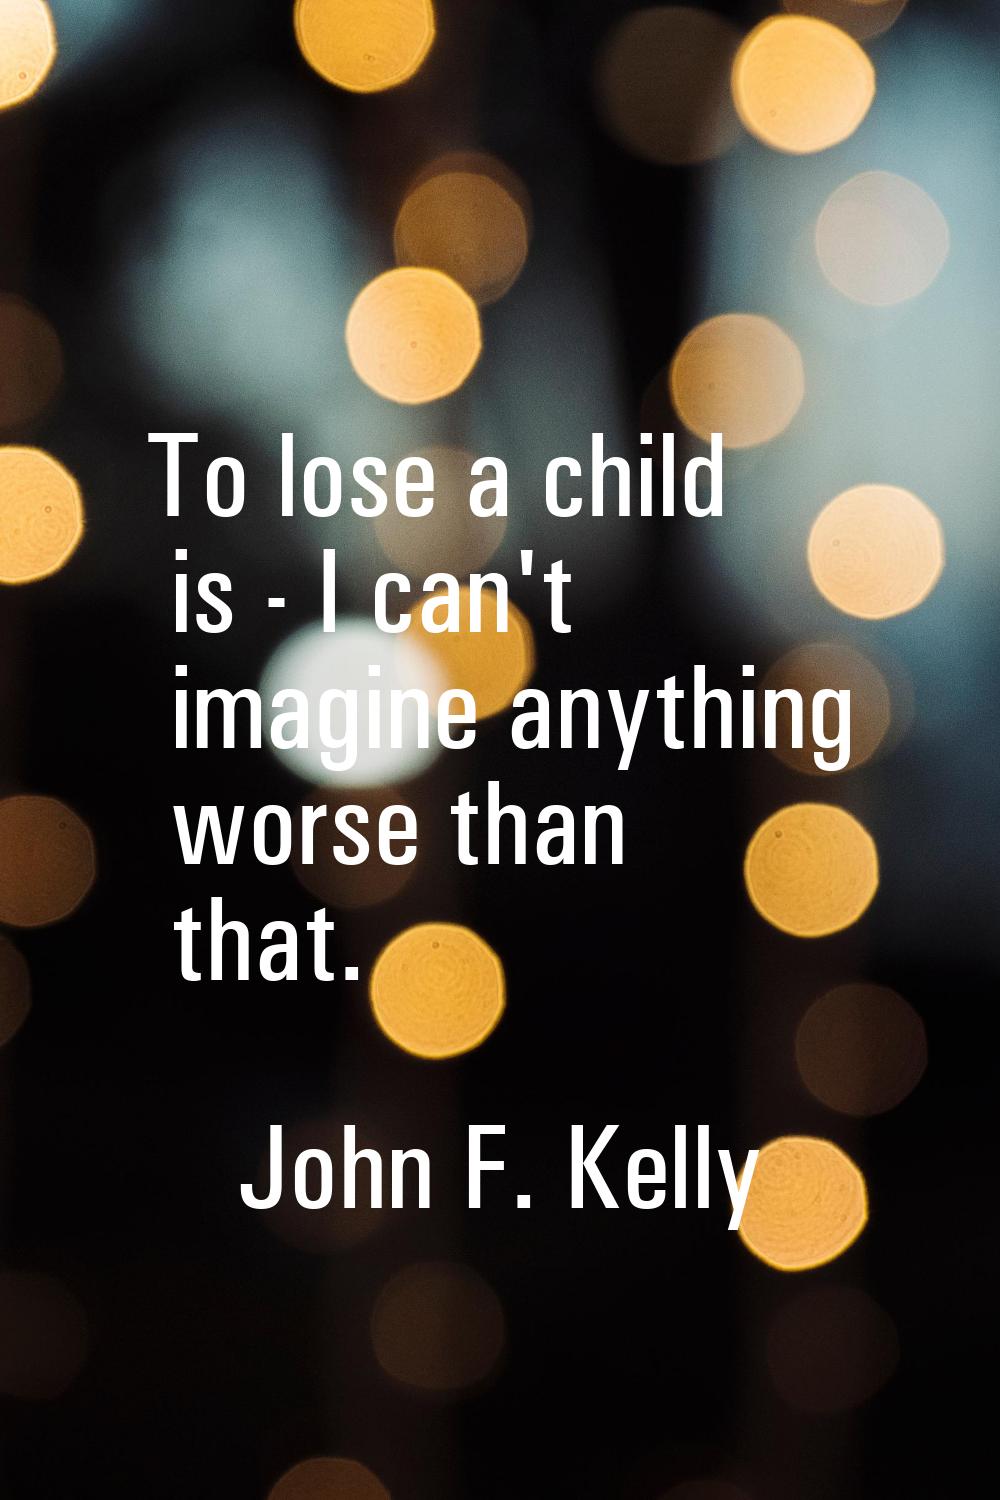 To lose a child is - I can't imagine anything worse than that.